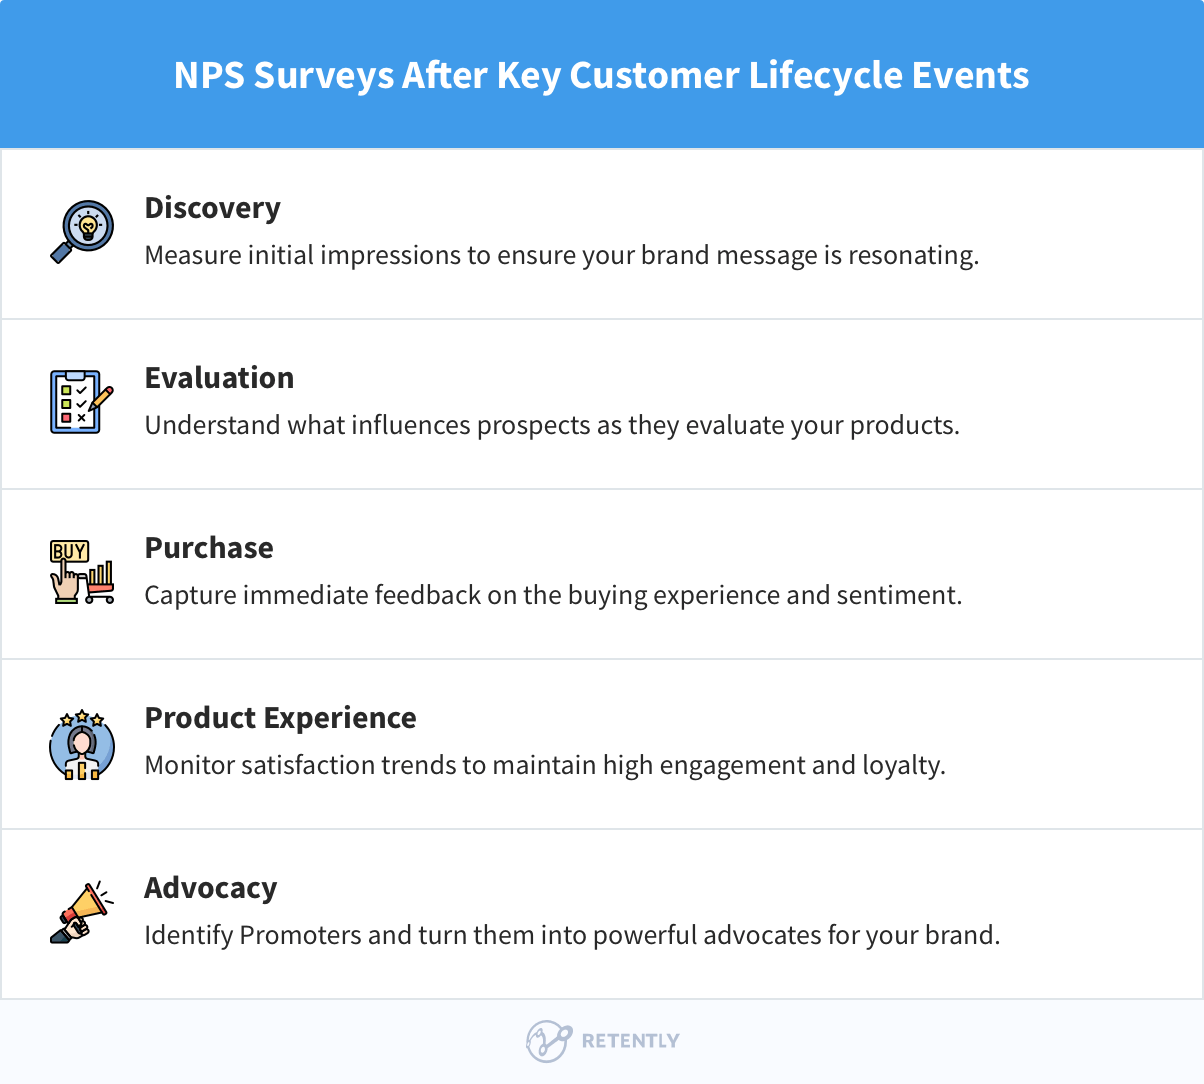 NPS Surveys After Key Customer Lifecycle Events